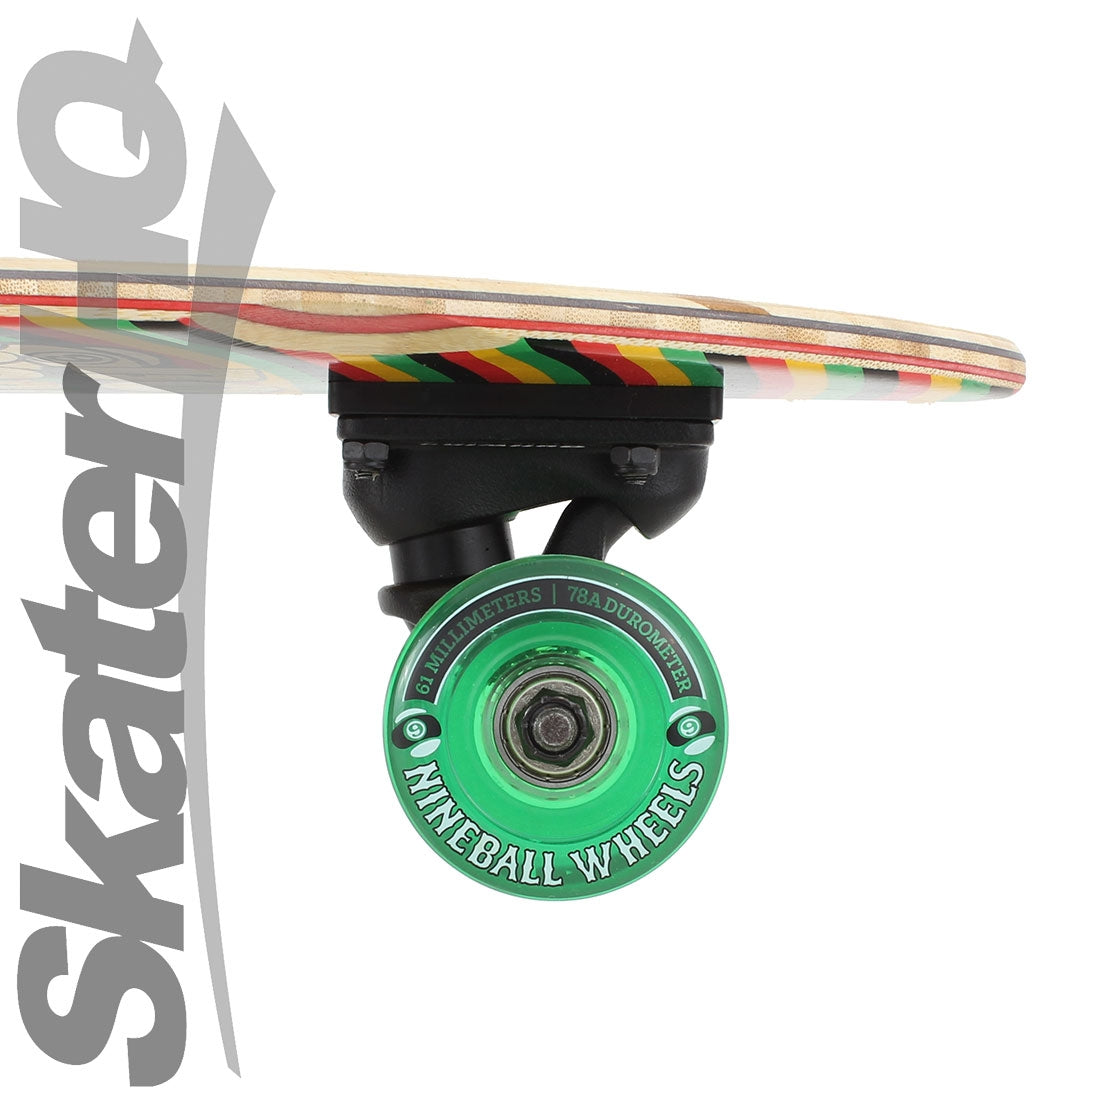 Sector 9 Trenchtown Rock 34 Complete Skateboard Compl Cruisers